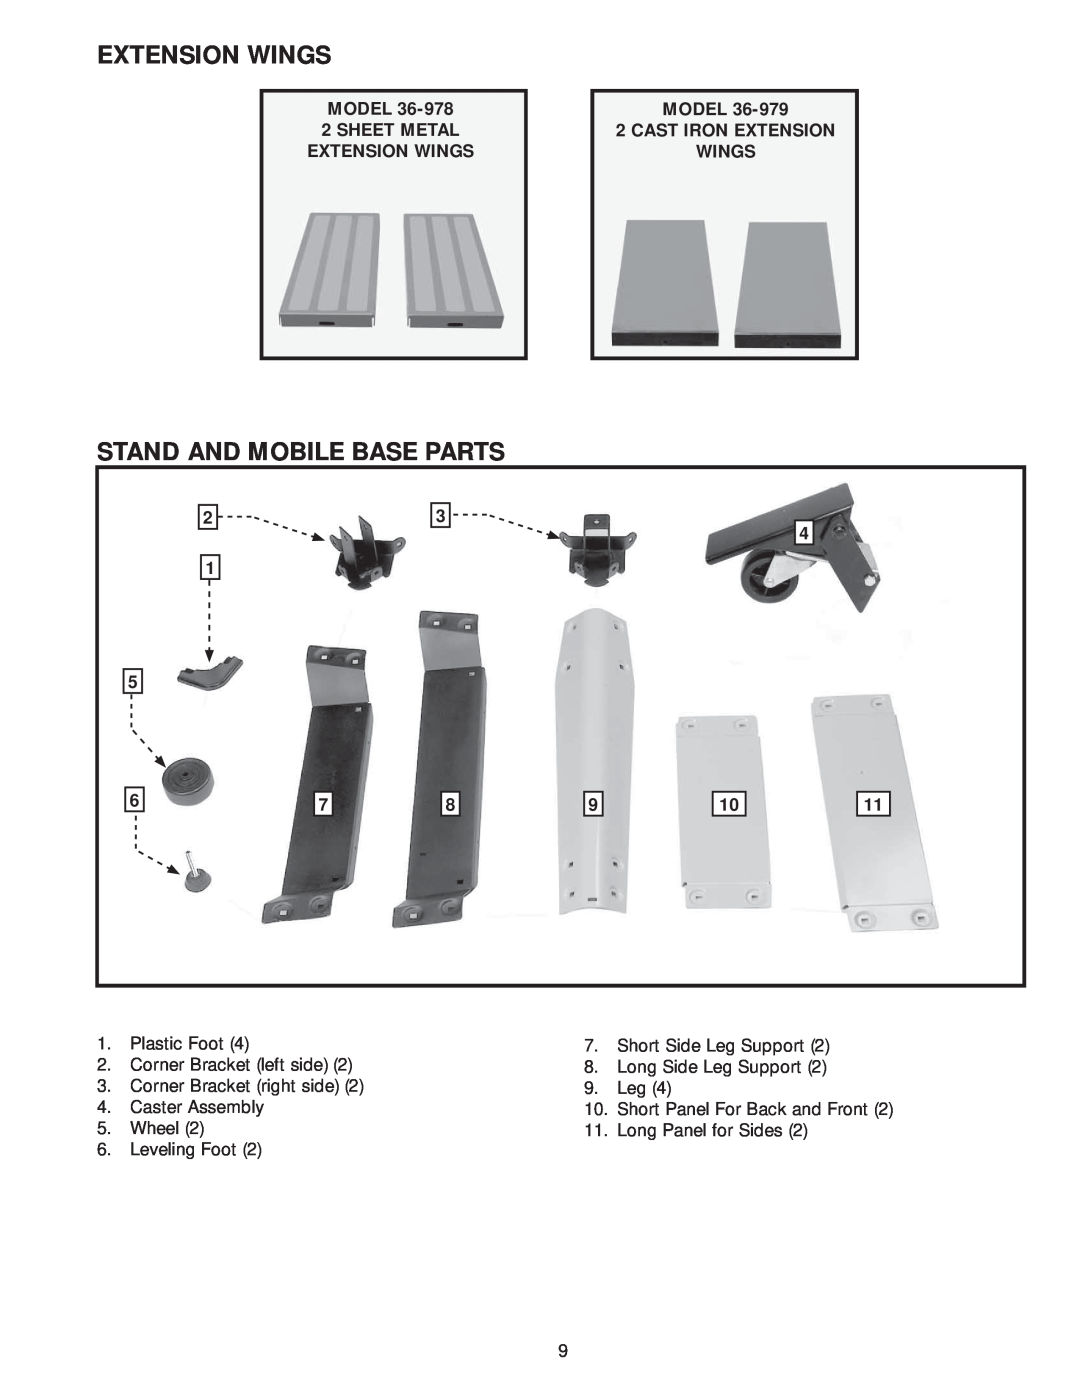 Delta 36-978, 36-979 instruction manual Extension Wings, Stand And Mobile Base Parts, MODEL 2 SHEET METAL EXTENSION WINGS 